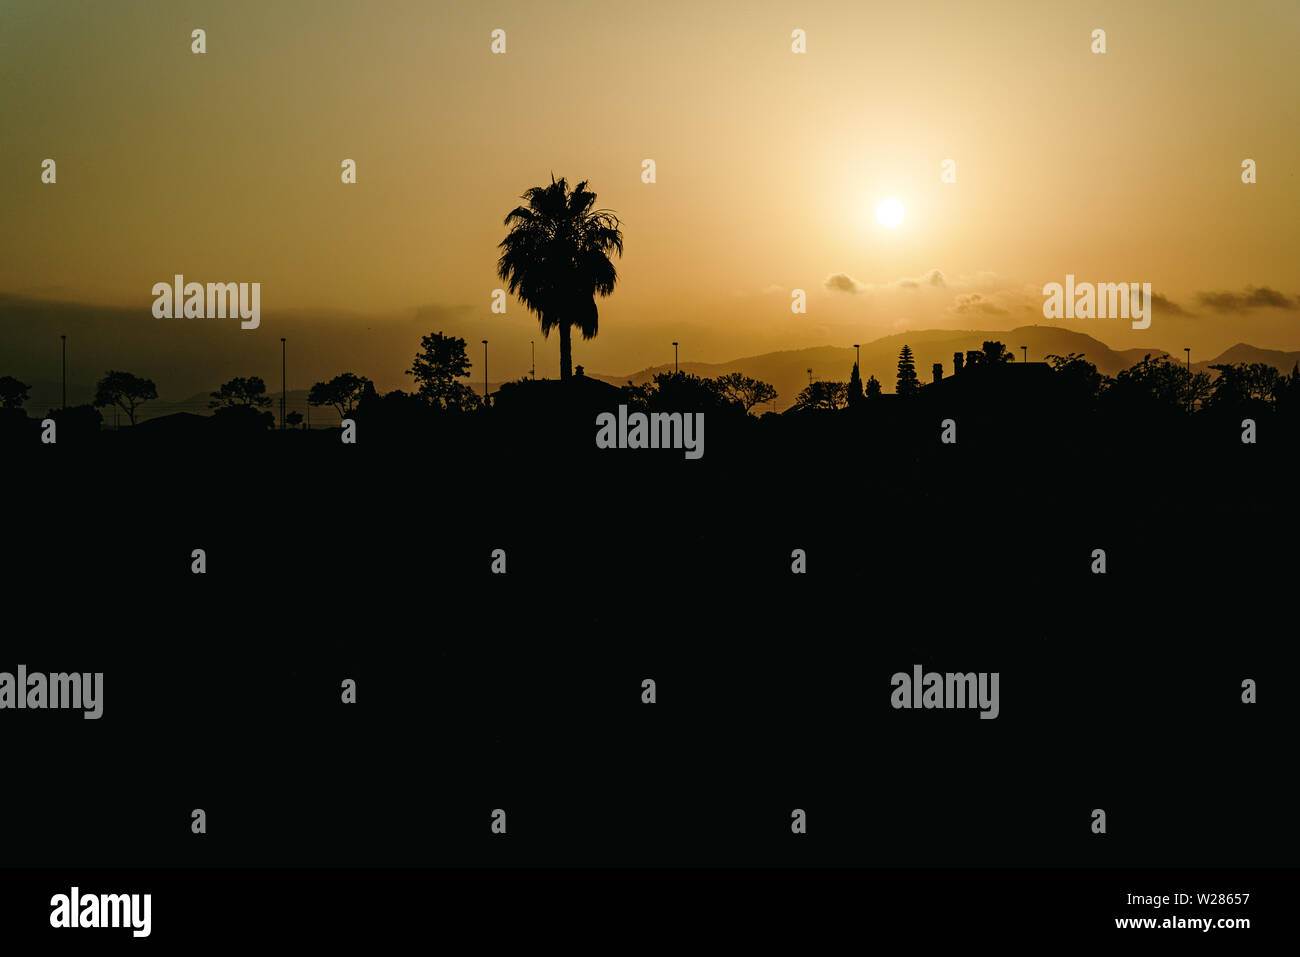 Silhouette of a city landscape deserting with a palm tree against the sun at sunset on a dark background, concept of global climate warming. Stock Photo